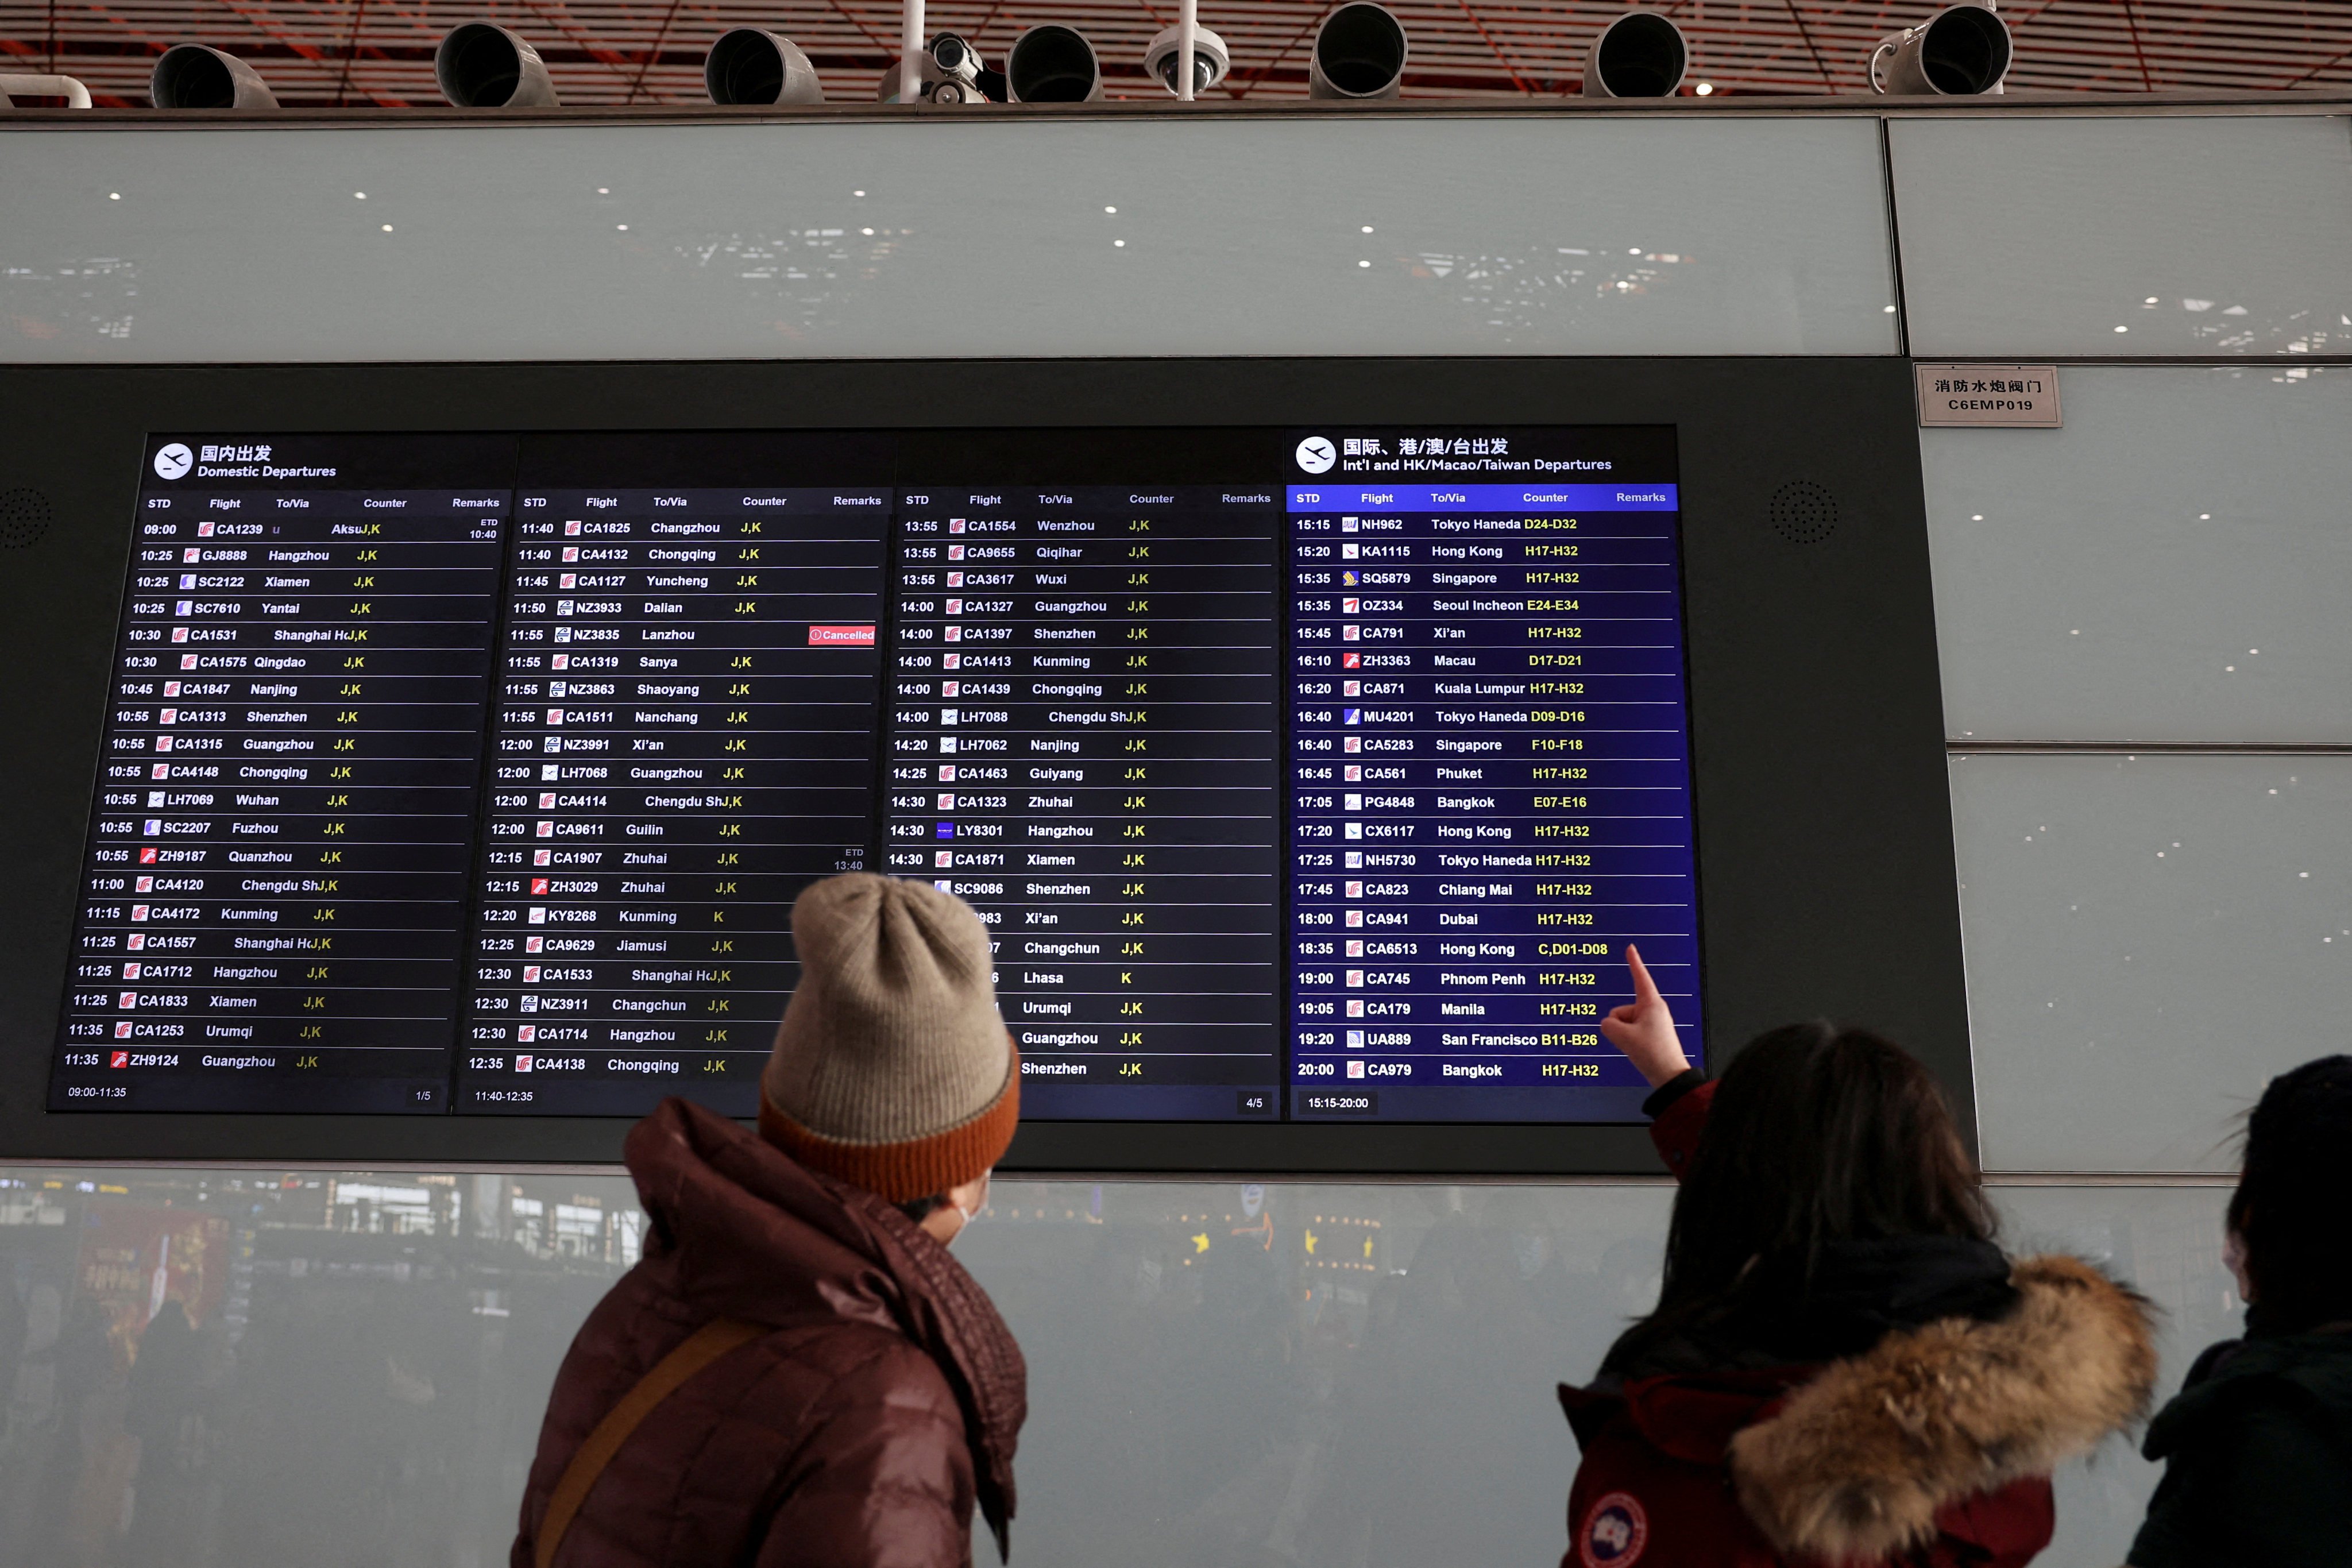 Ahead of the May Day holiday, 790,000 international flight tickets have been booked as of Monday, representing an increase of over 1.5 times compared to the same period last year, according to Chinese booking firm Umetrip. Photo: Reuters